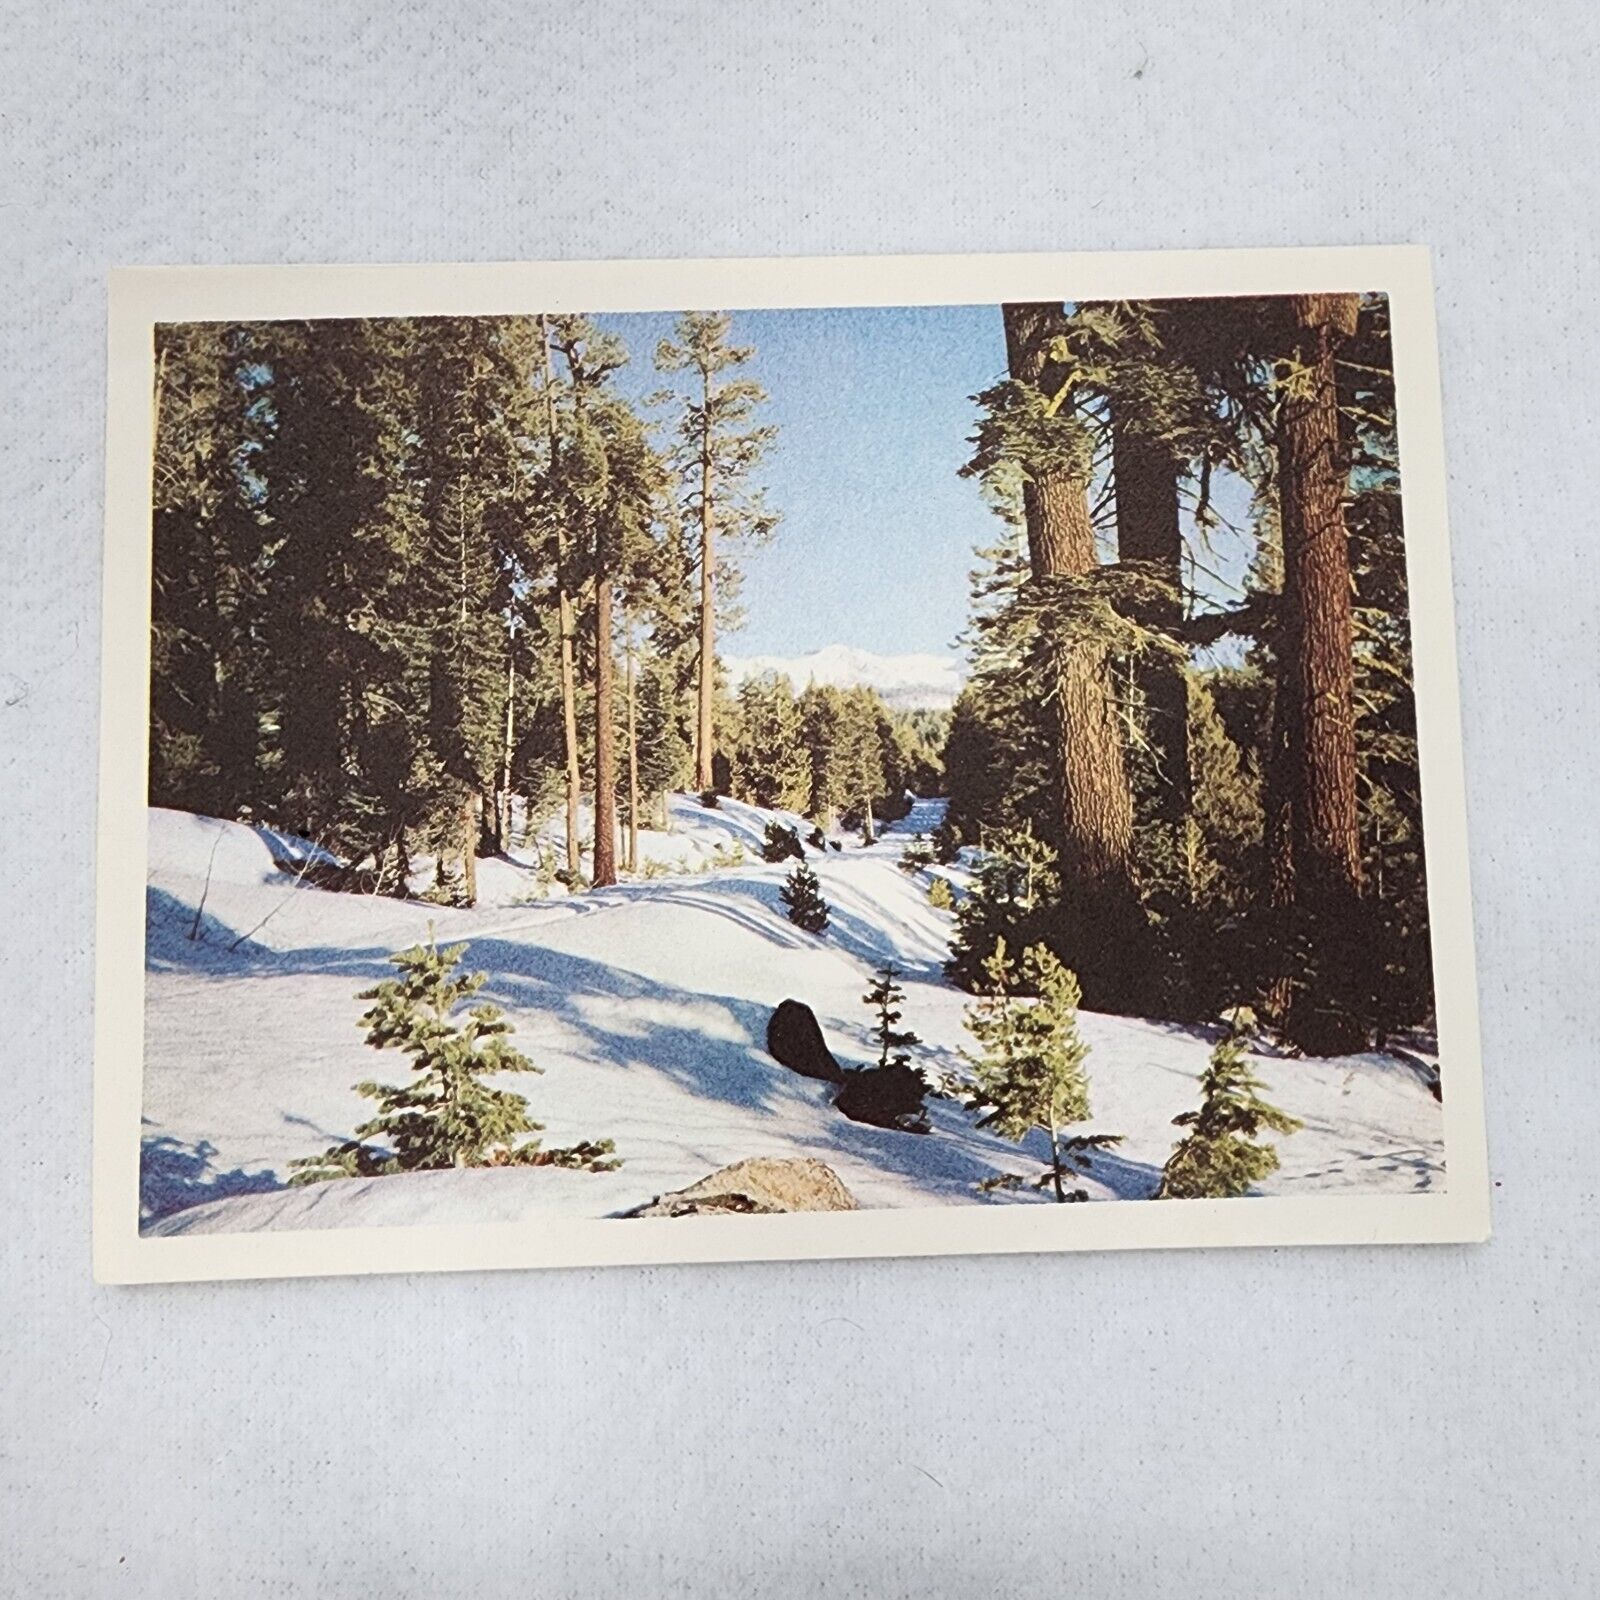 Vintage Christmas Greetings Card 5.5x4 Holiday Seasons Snow Covered Forest Trail